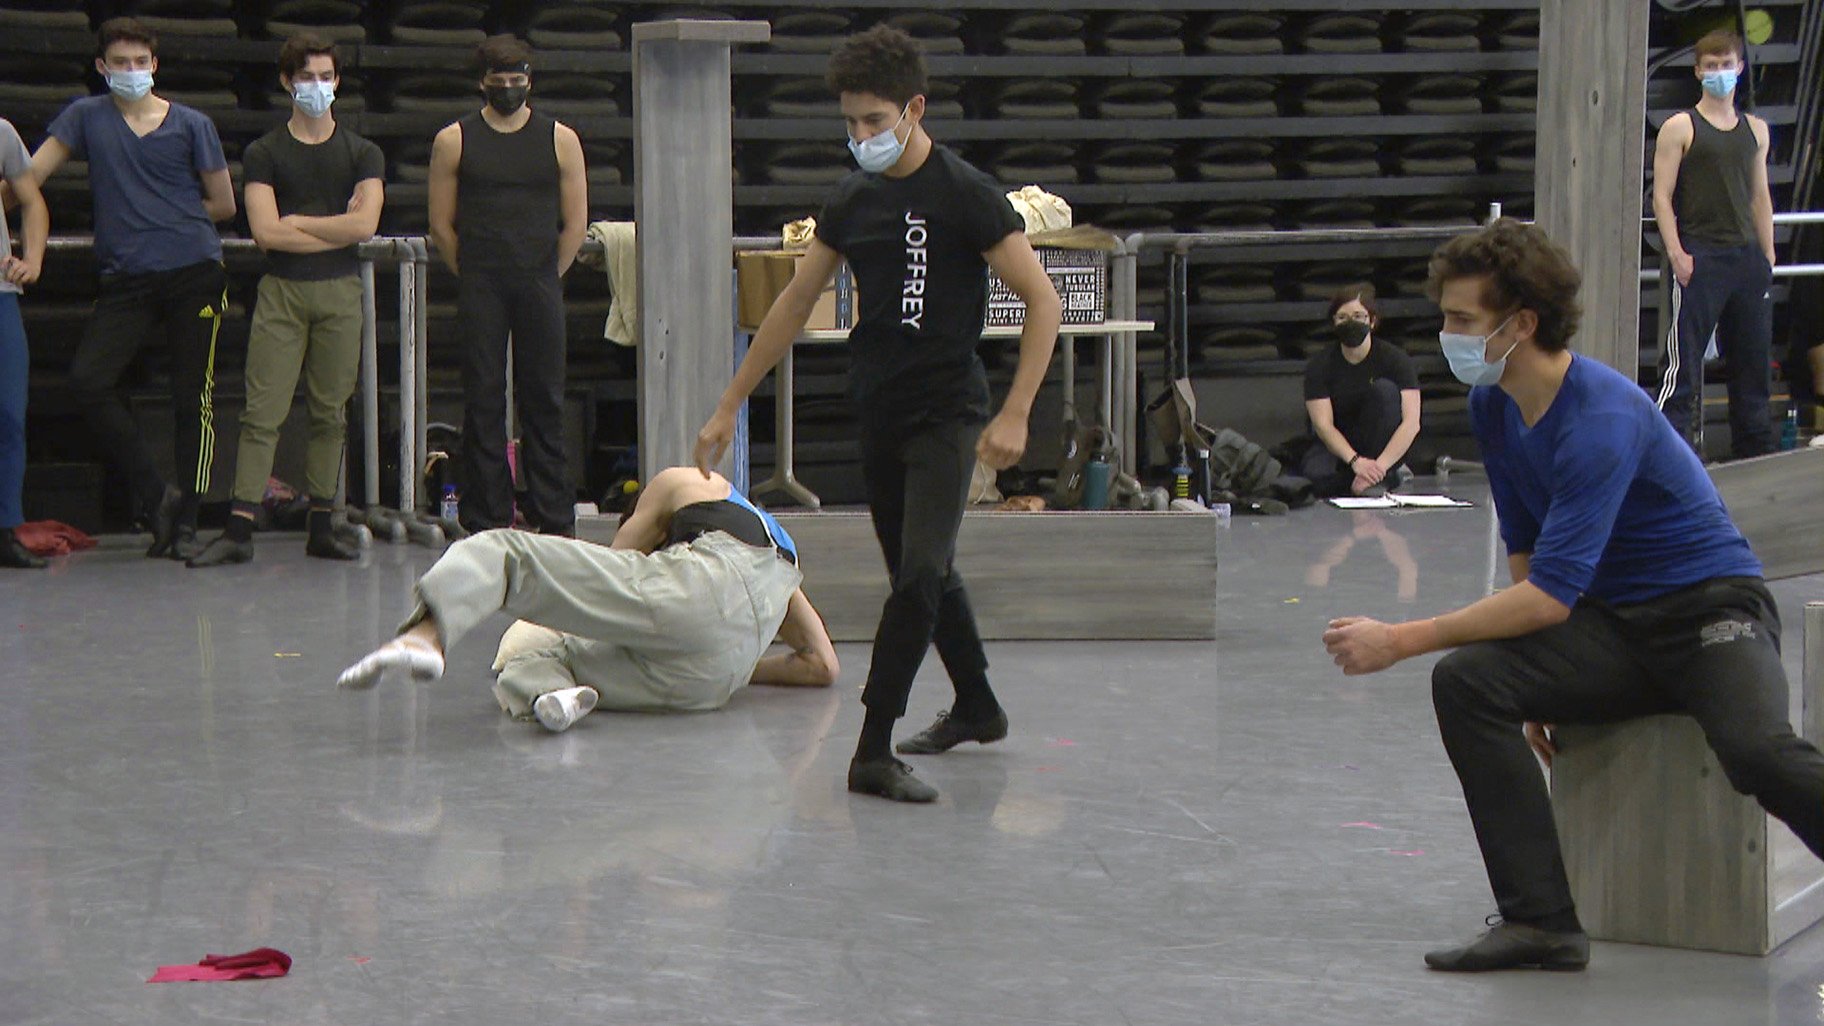 Joffrey Ballet's 'Of Mice and Men' Shifts Focus of Tragic Story - WTTW News